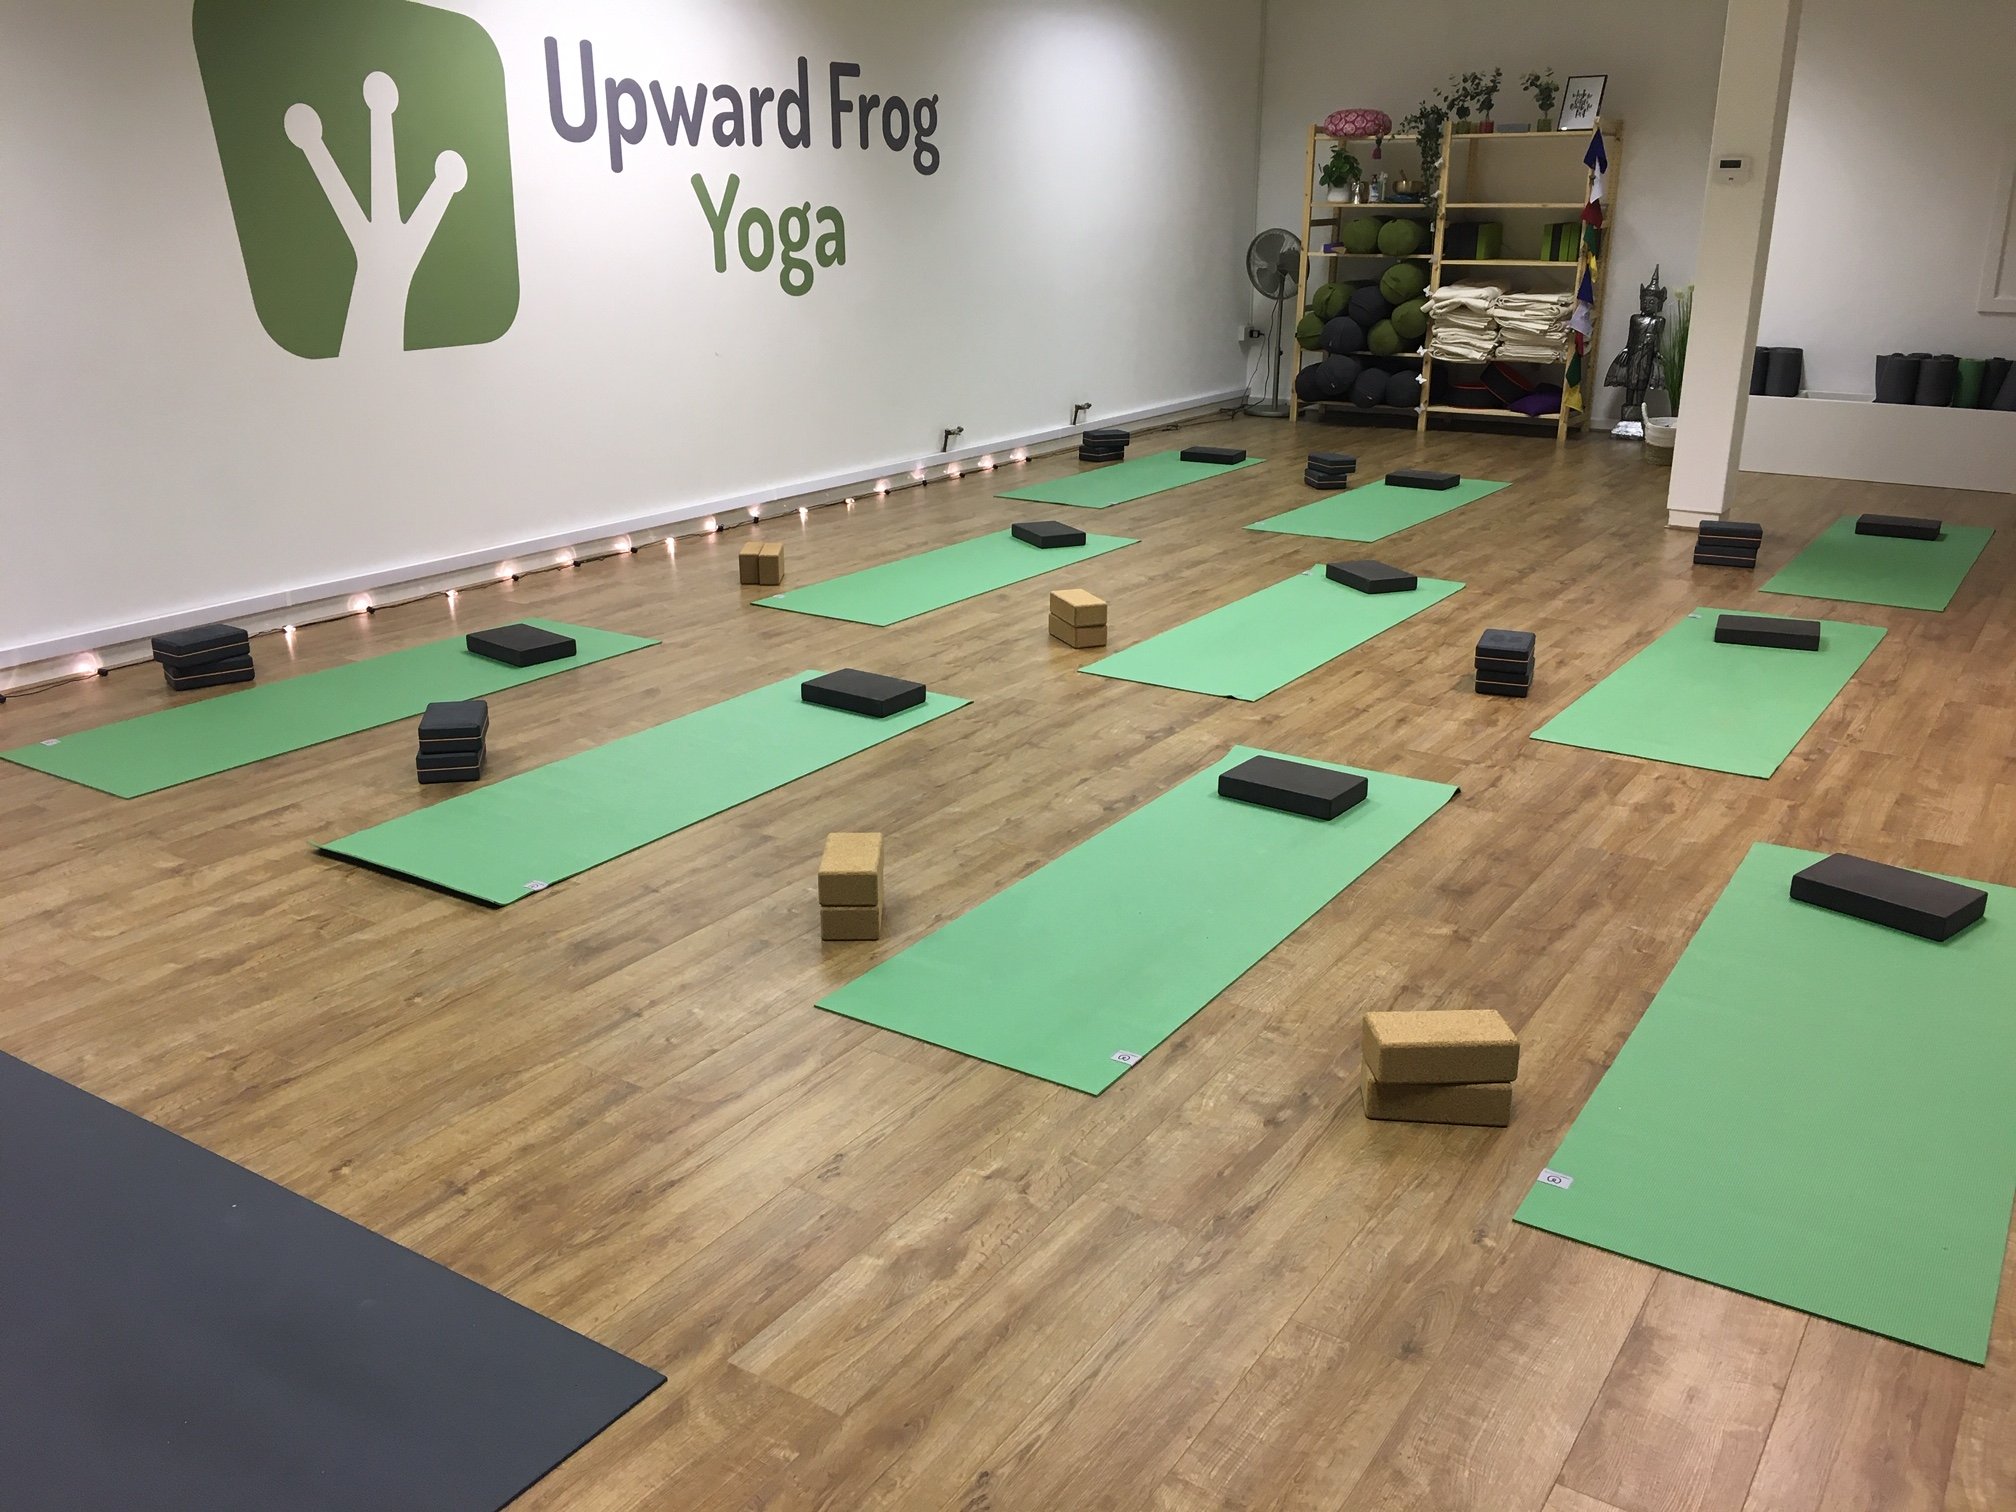 Picture of the interior of Upward Frog Yoga Studio in Stockport.JPG